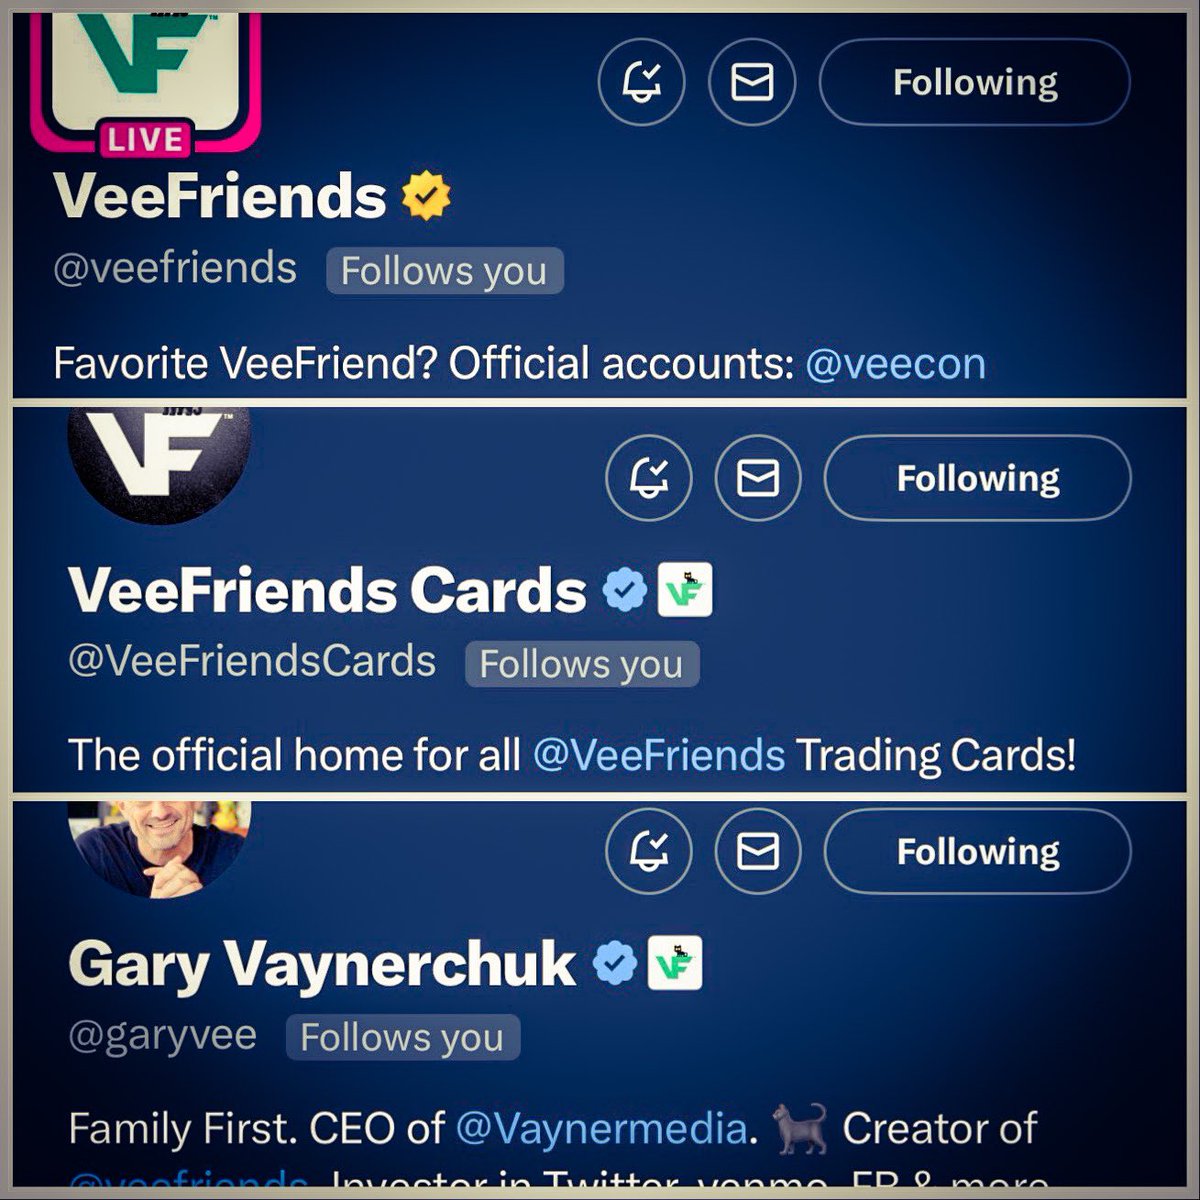 Super happy! 🎉 Now officially followed by @garyvee  @veefriends & @VeeFriendsCards What an honor! #thankful 
⬇️